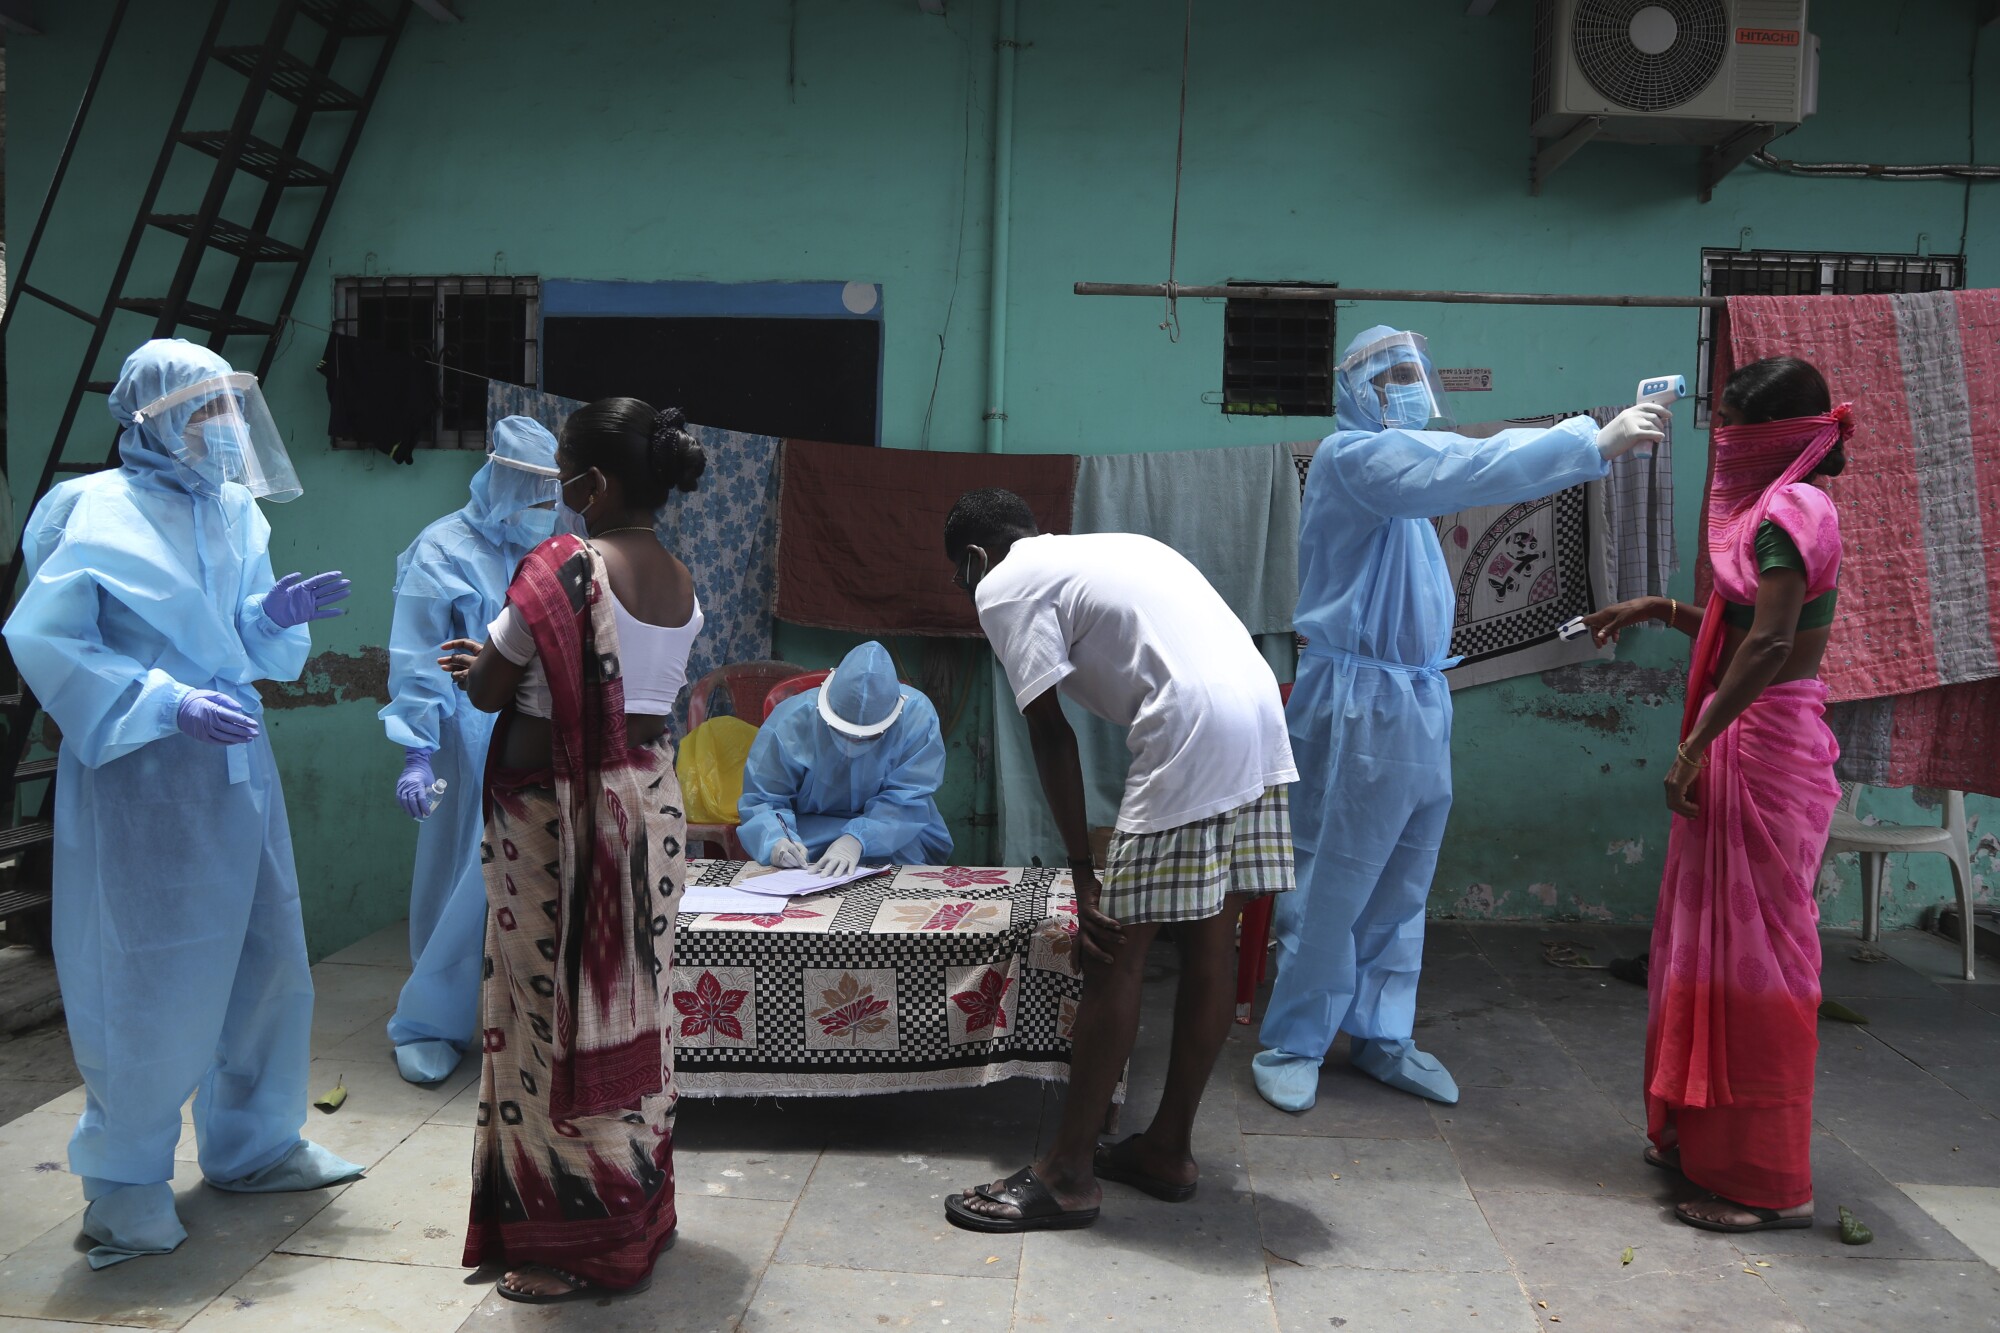 Doctors conduct a free medical camp in Dharavi, a slum in Mumbai, India.